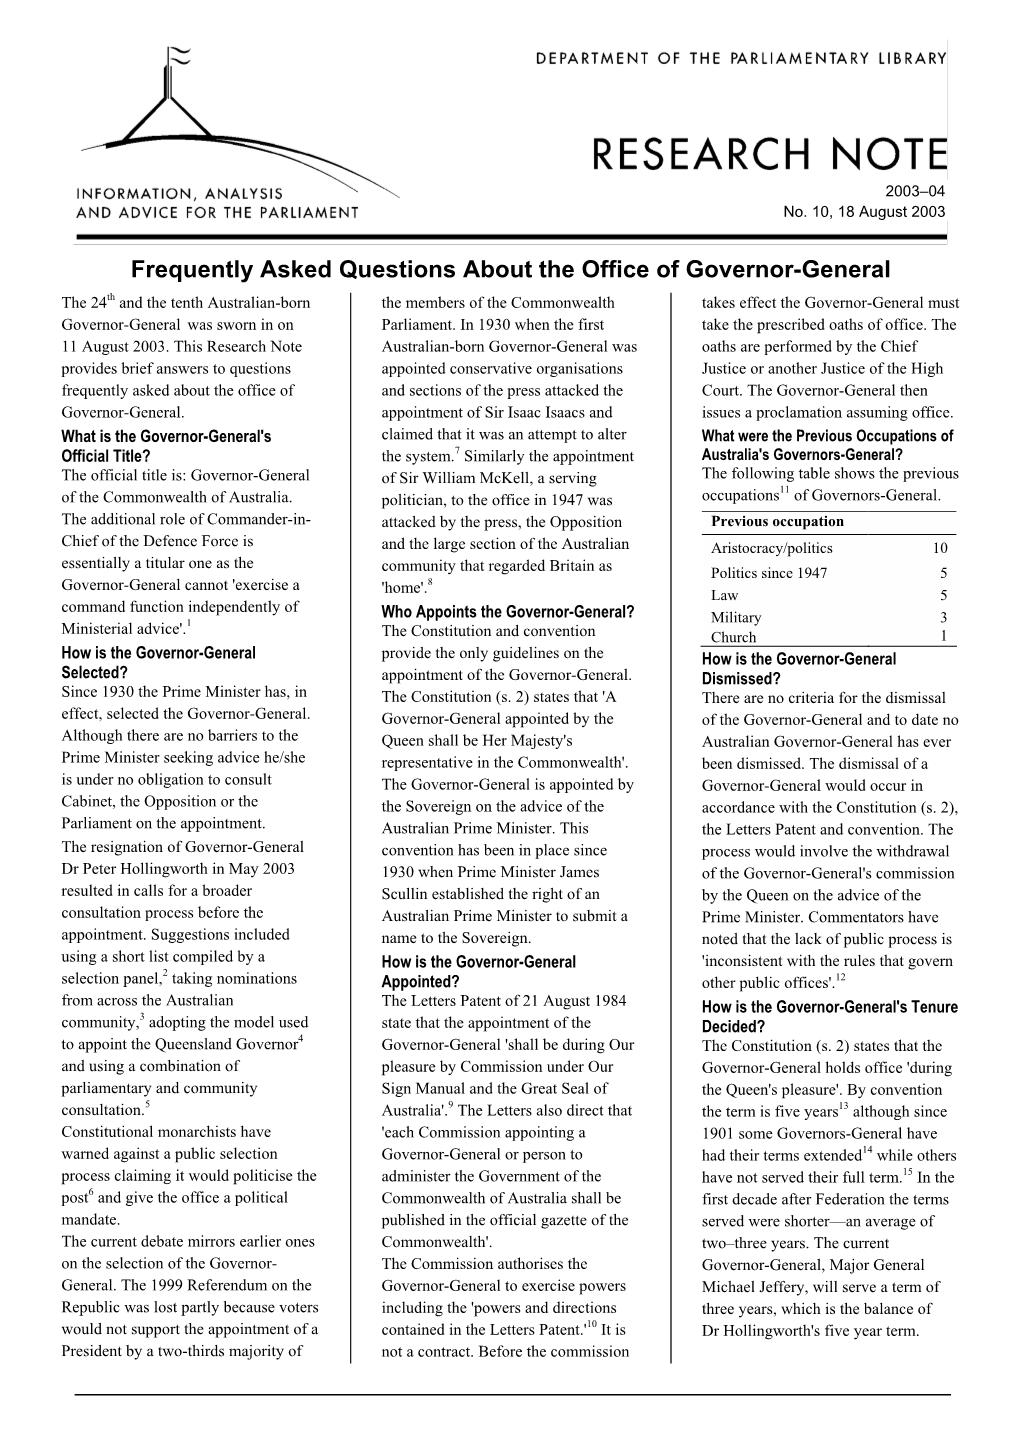 Frequently Asked Questions About the Office of Governor-General